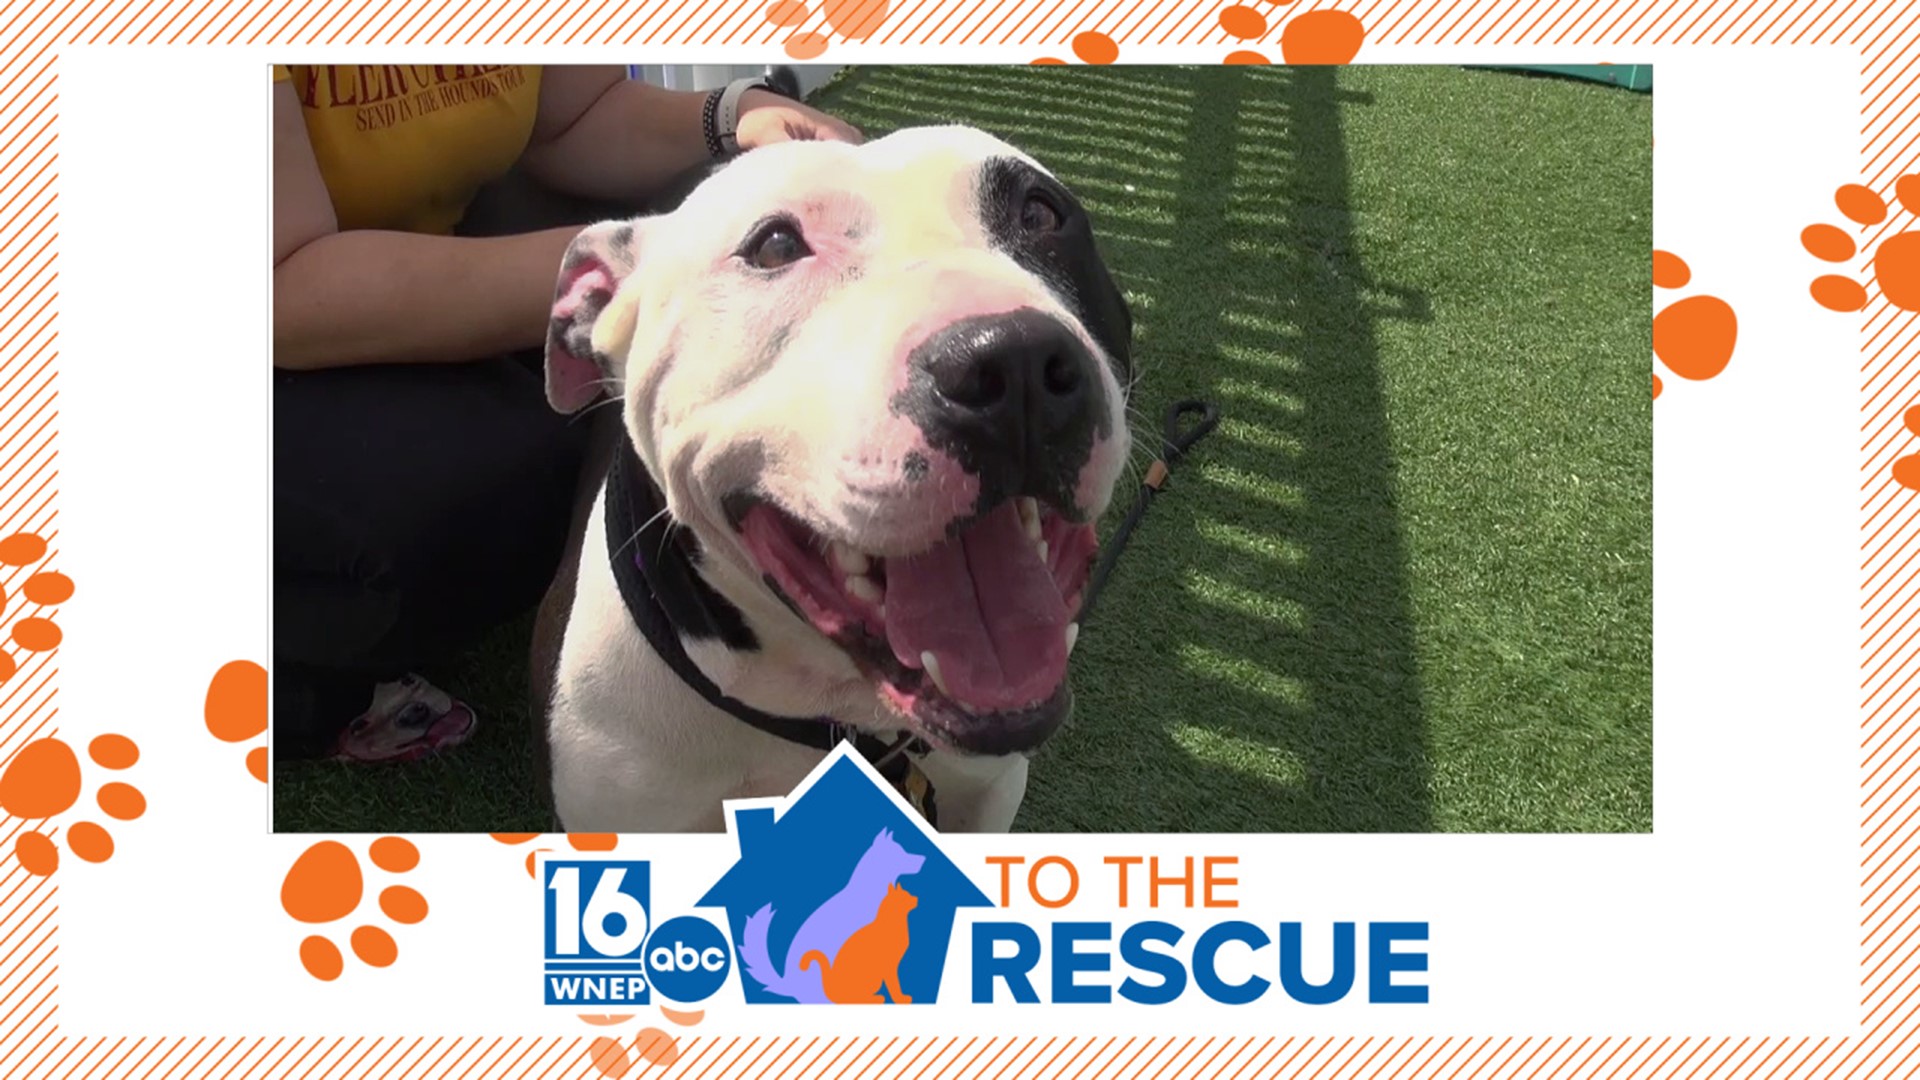 In this week's 16 To The Rescue, we meet a Griffin Pond Animal Shelter favorite. Newswatch 16's Ally Gallo introduces us to the easygoing Rex.